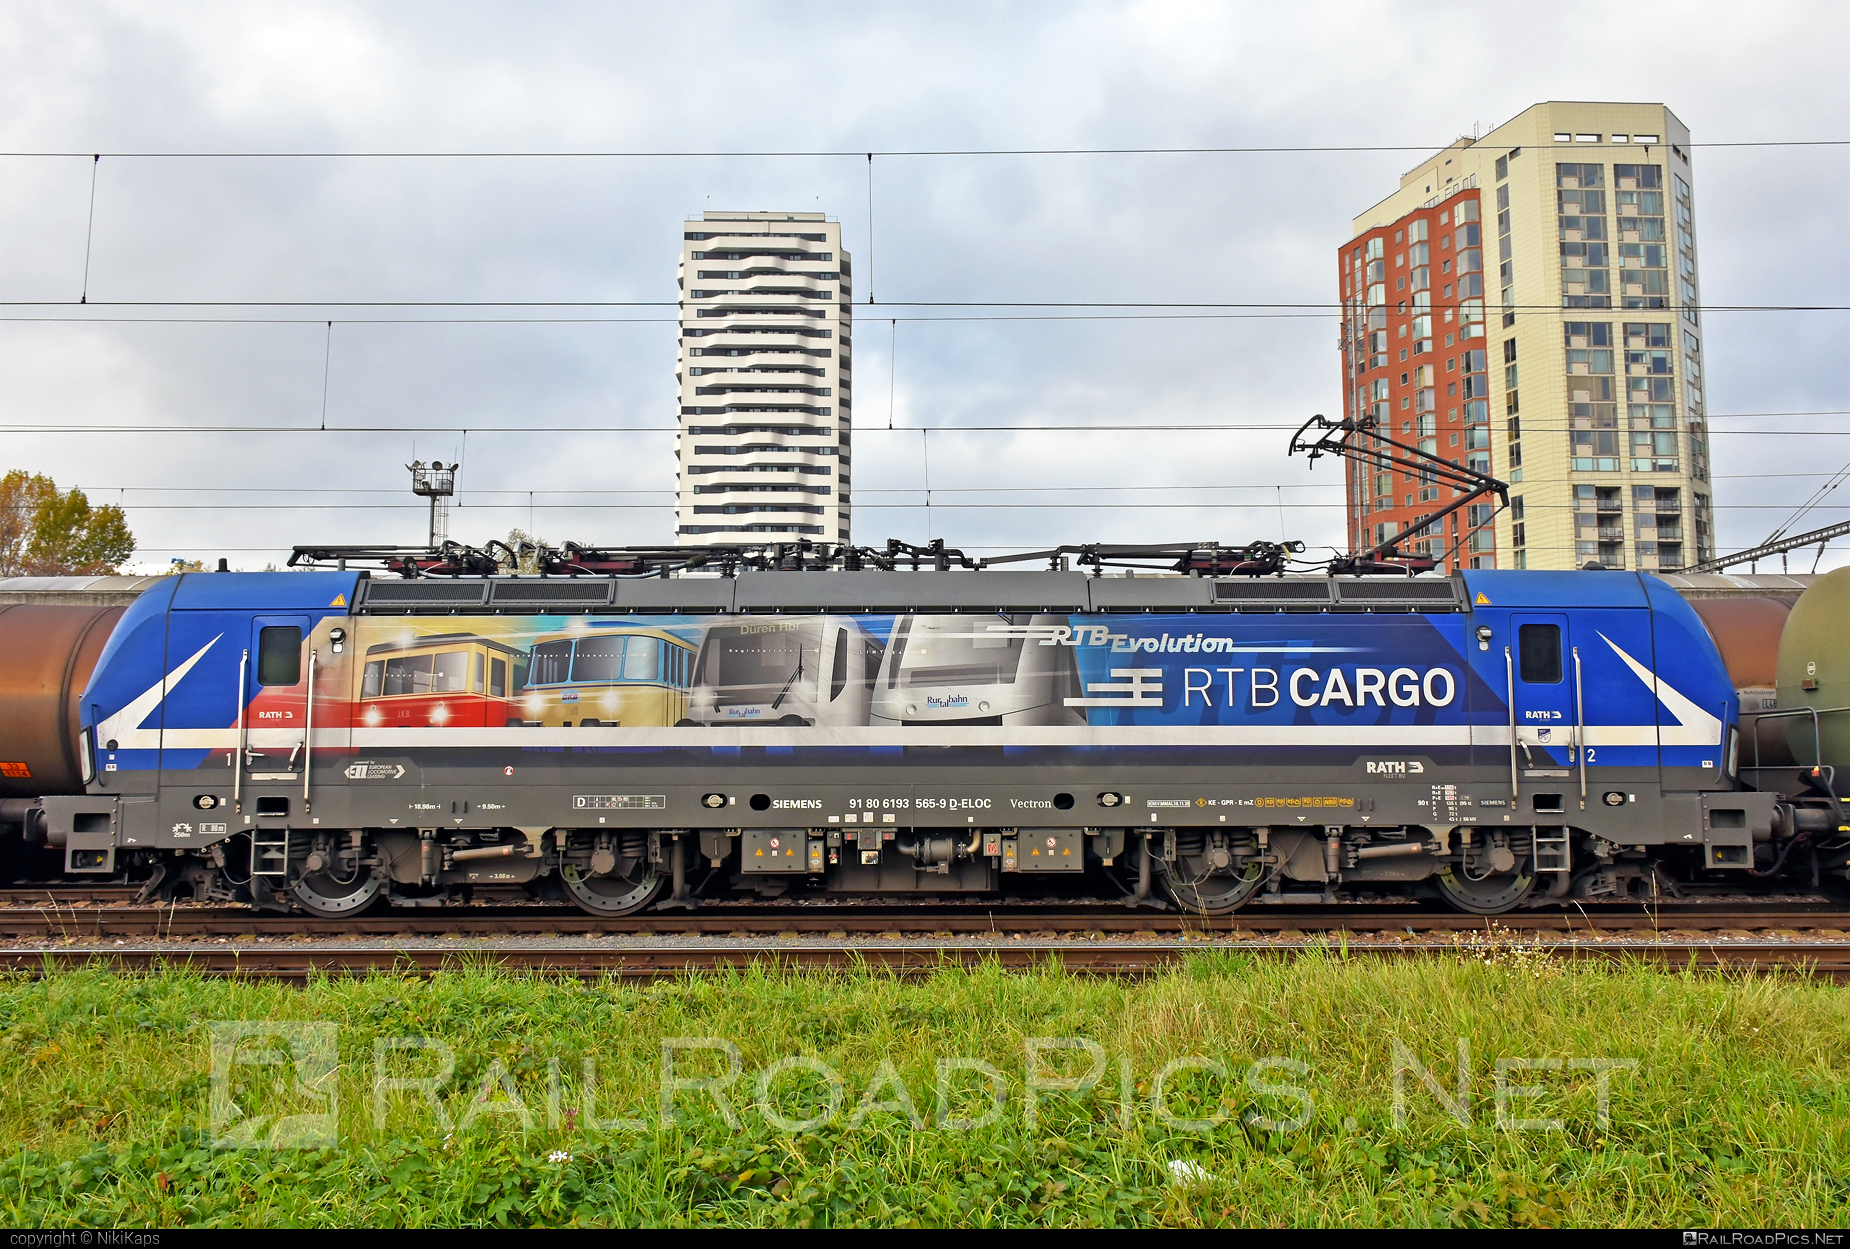 Siemens Vectron MS - 193 565 operated by RTB Cargo GmbH #ell #ellgermany #eloc #europeanlocomotiveleasing #rtb #rtbcargo #siemens #siemensVectron #siemensVectronMS #vectron #vectronMS